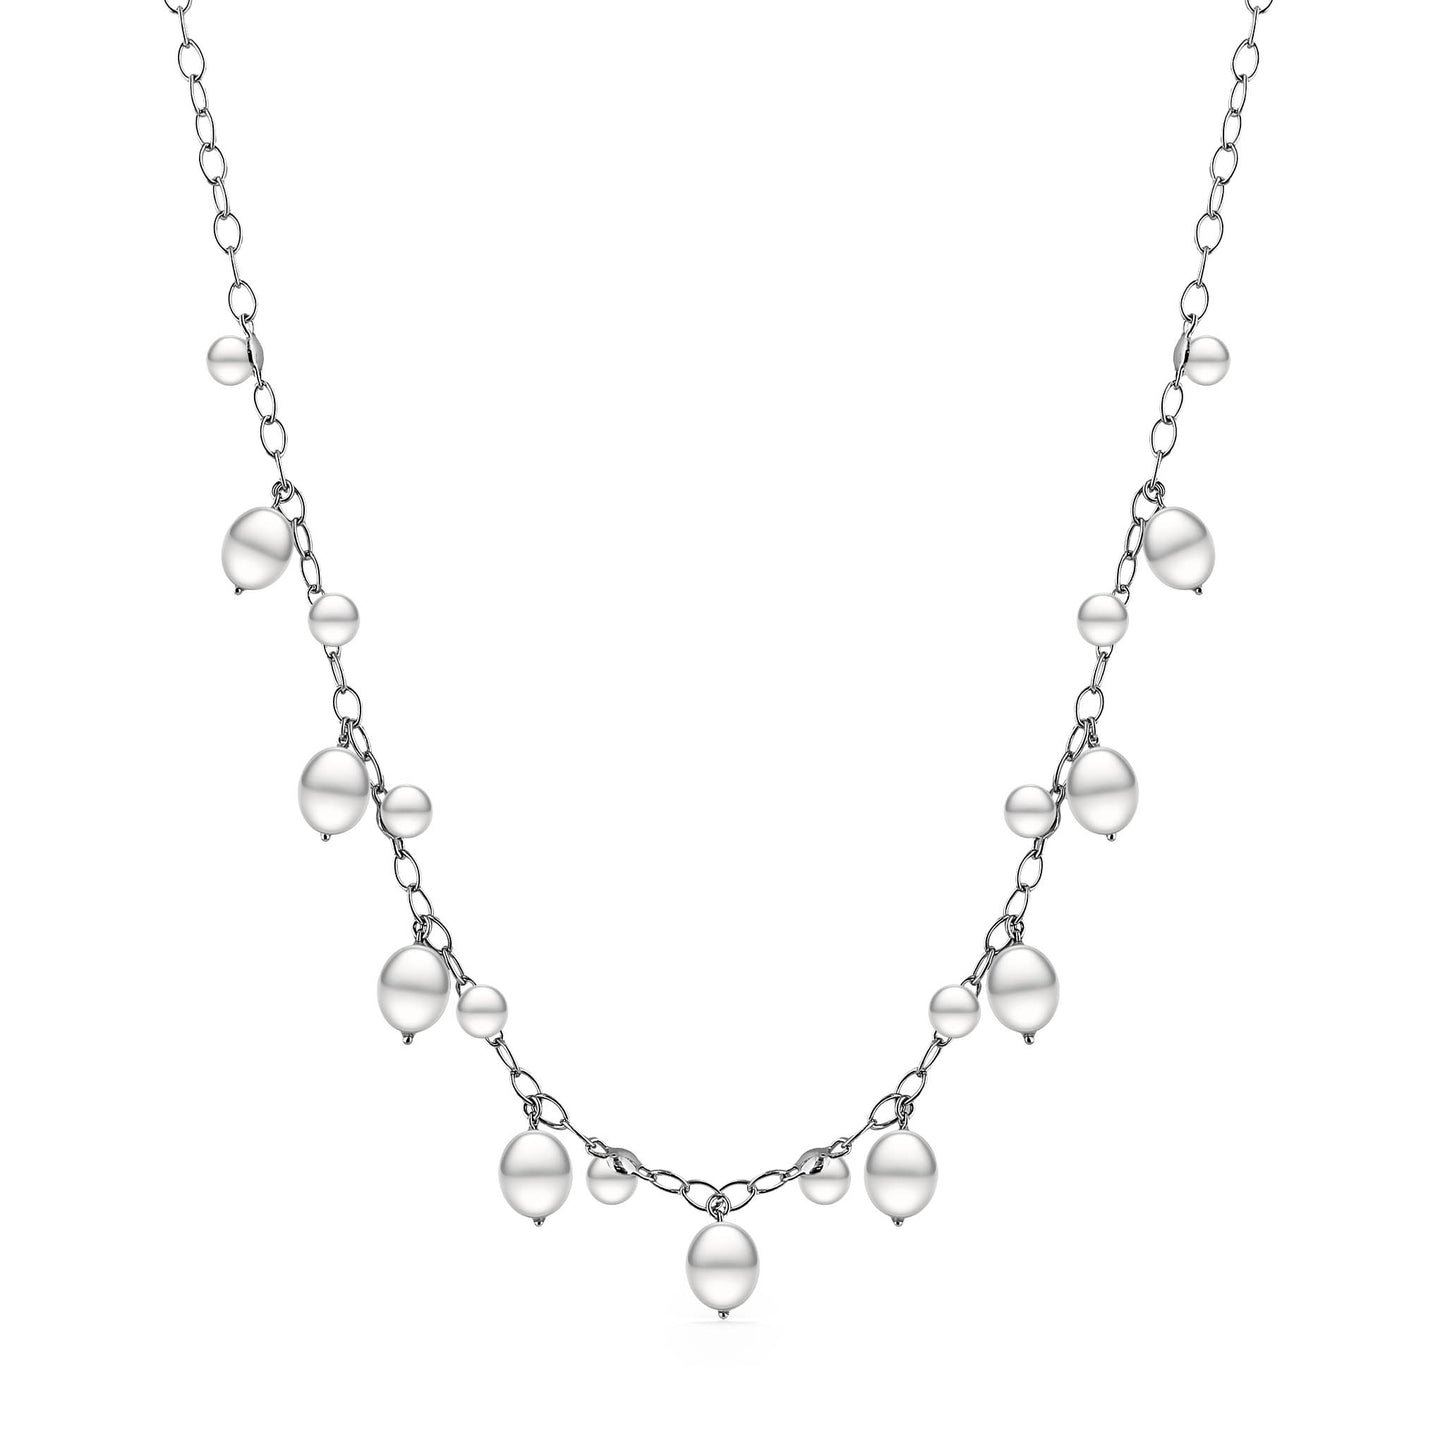 44532 - Sterling Silver - White Freshwater Pearl Stationary Necklace